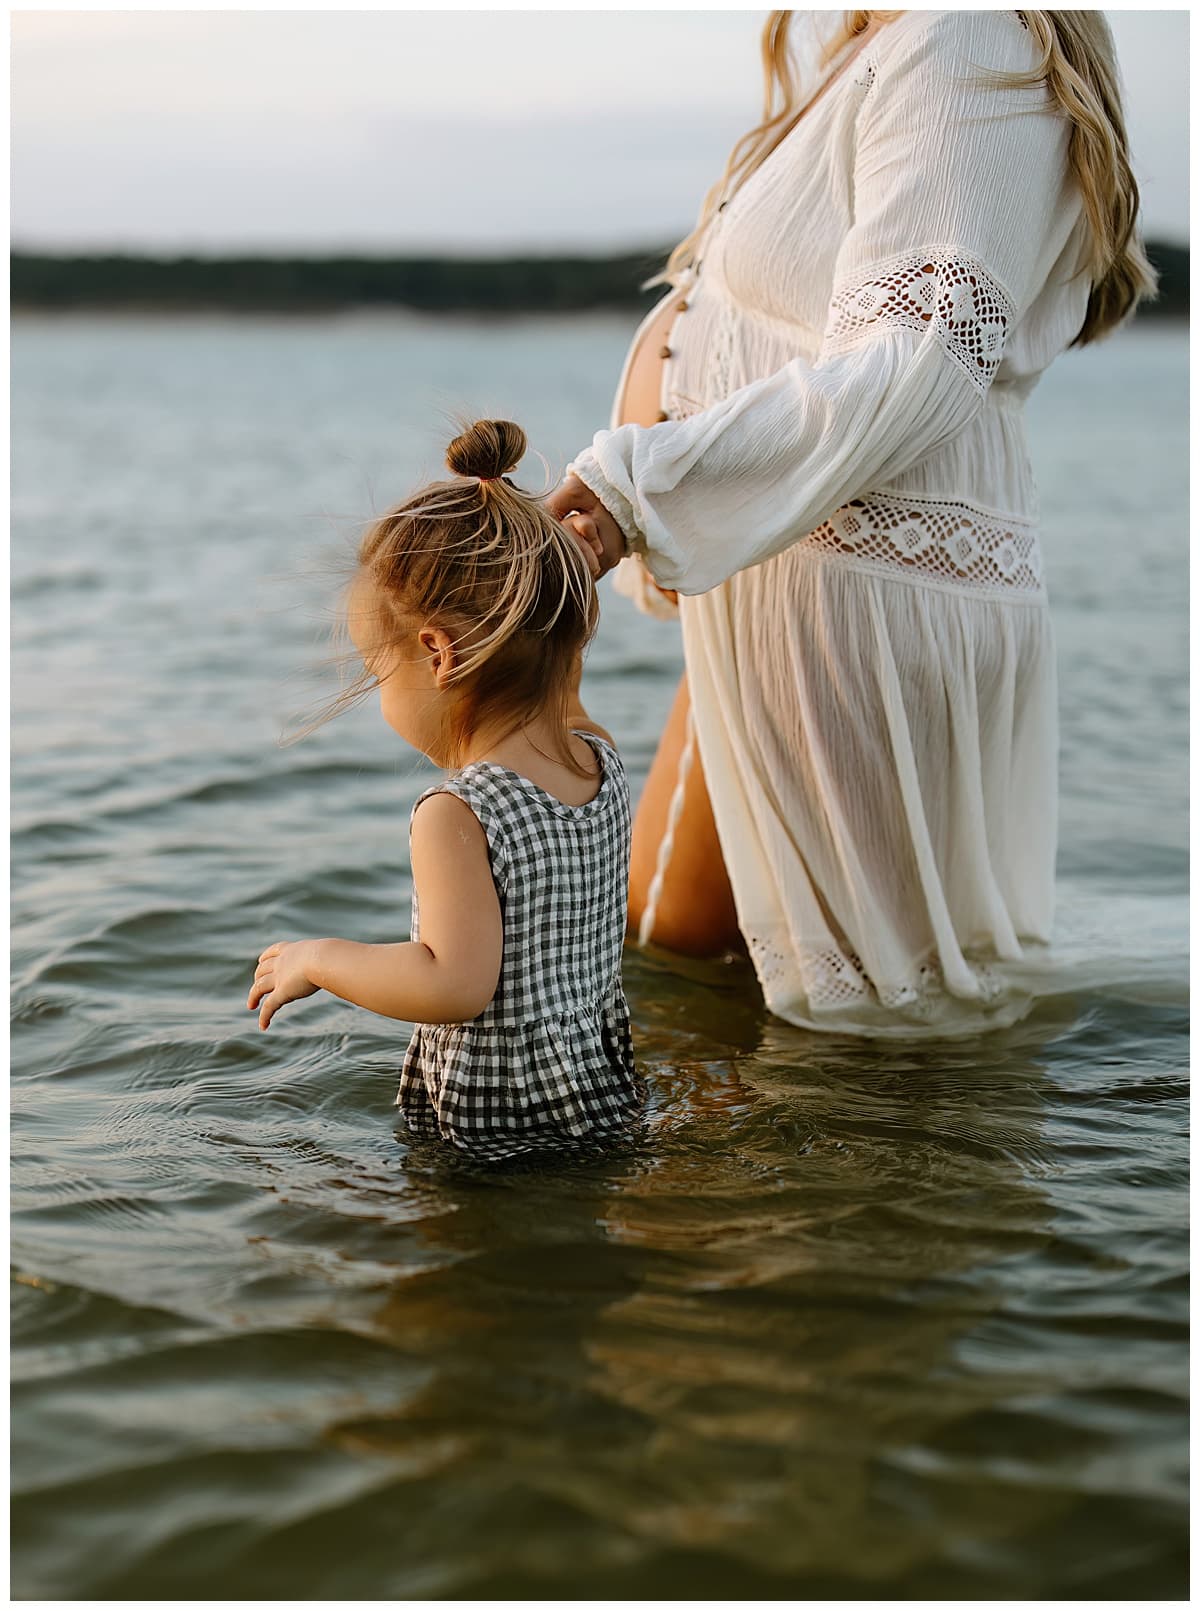 Mom and daughter walk together in the water for Sandy Beach Maternity Session